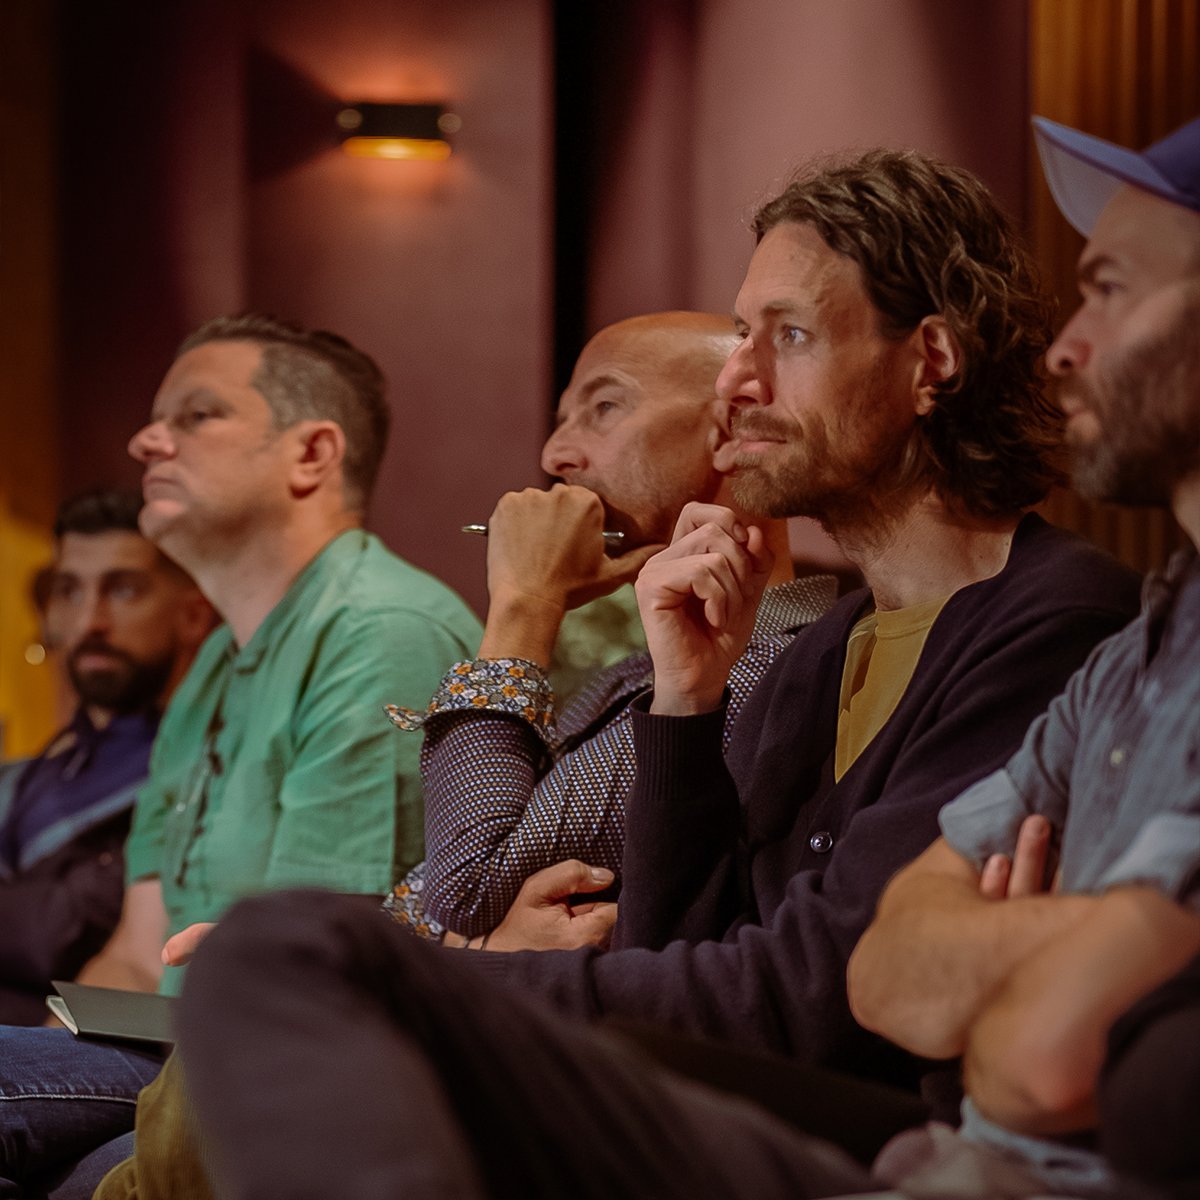 Join Tchad Blake for a four-day mixing Masterclass in Paris from May 13-16. Explore new sonic territory and uncover his radical approaches to creating exceptional records, showcased in his collaborations with Arctic Monkeys and others. Apply now: mwtm.com/apply